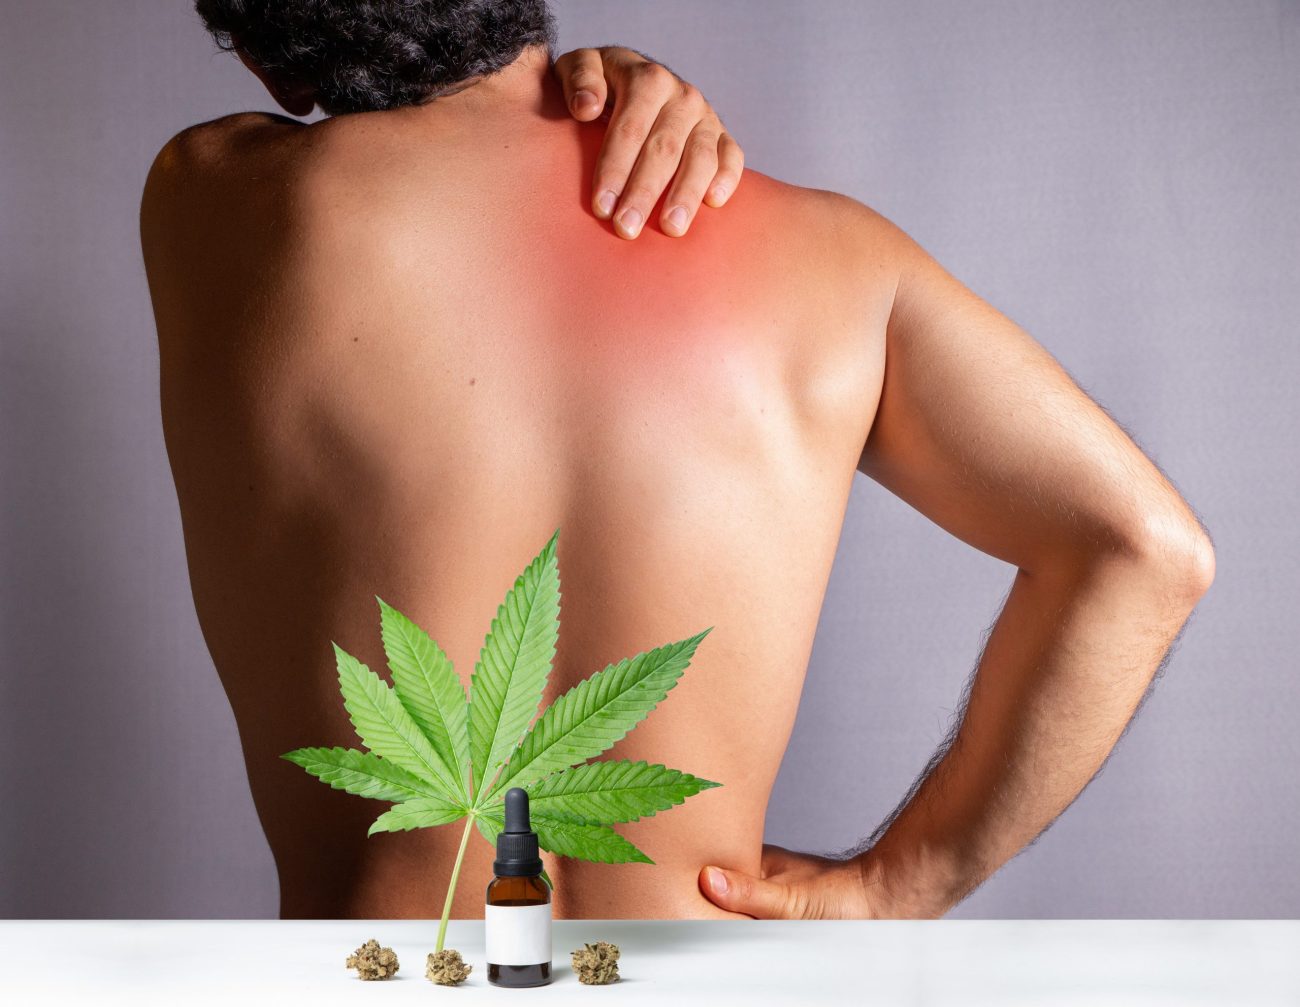 CBD oils designed for athletes to treat muscle discomfort, oil made from cannabis extract to care his injured back, medical pain treatment. Isolated on gray background